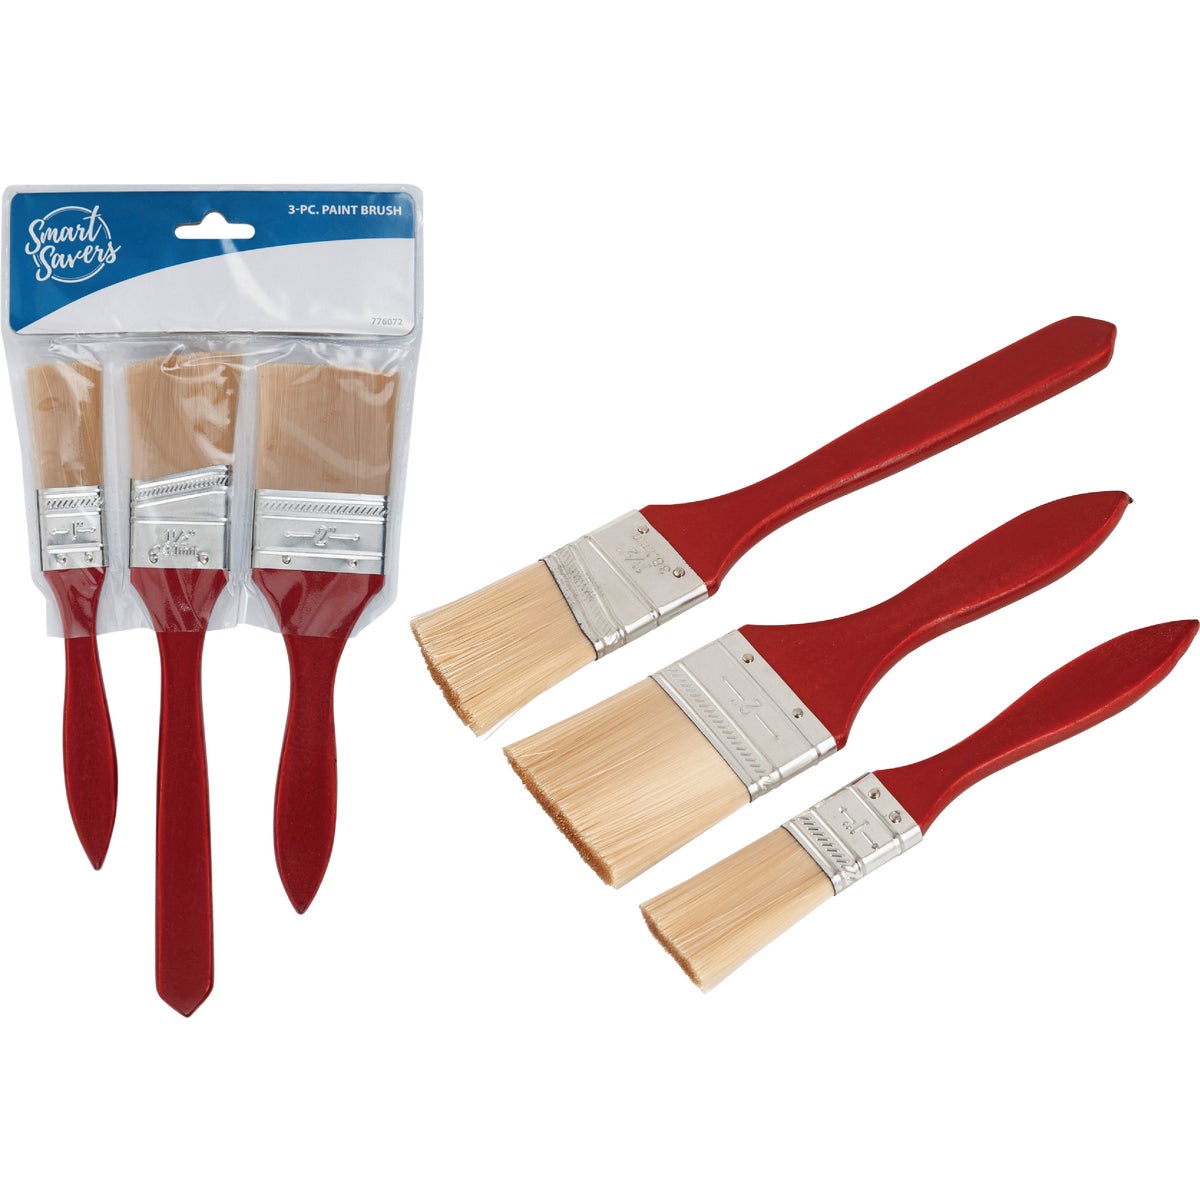 Smart Savers 1 In. Flat, 1-1/2 In. Flat, 2 In. Flat Polyester Assorted Paint Brush Set (3-Pack)